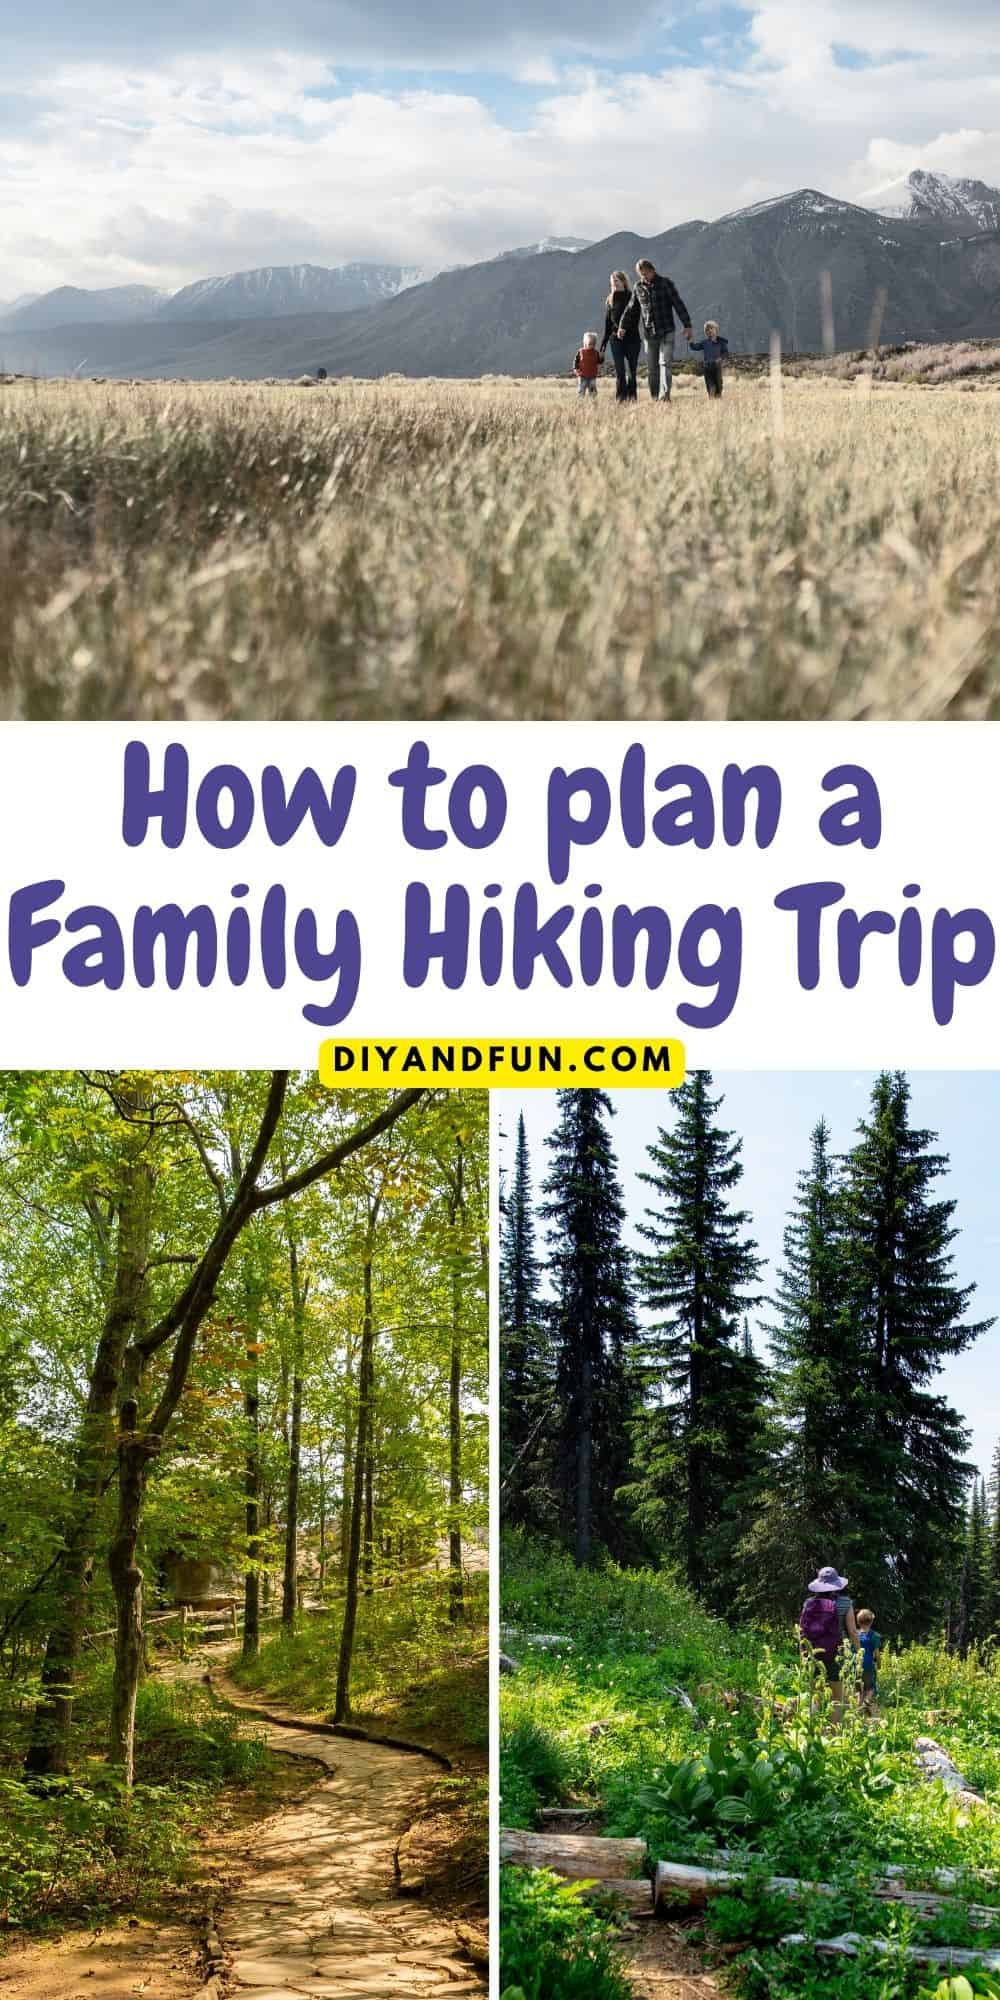 How to Plan a Family Hiking Trip, a simple guide for planning a hiking trip with children of most ages. Includes day trips and vacations.